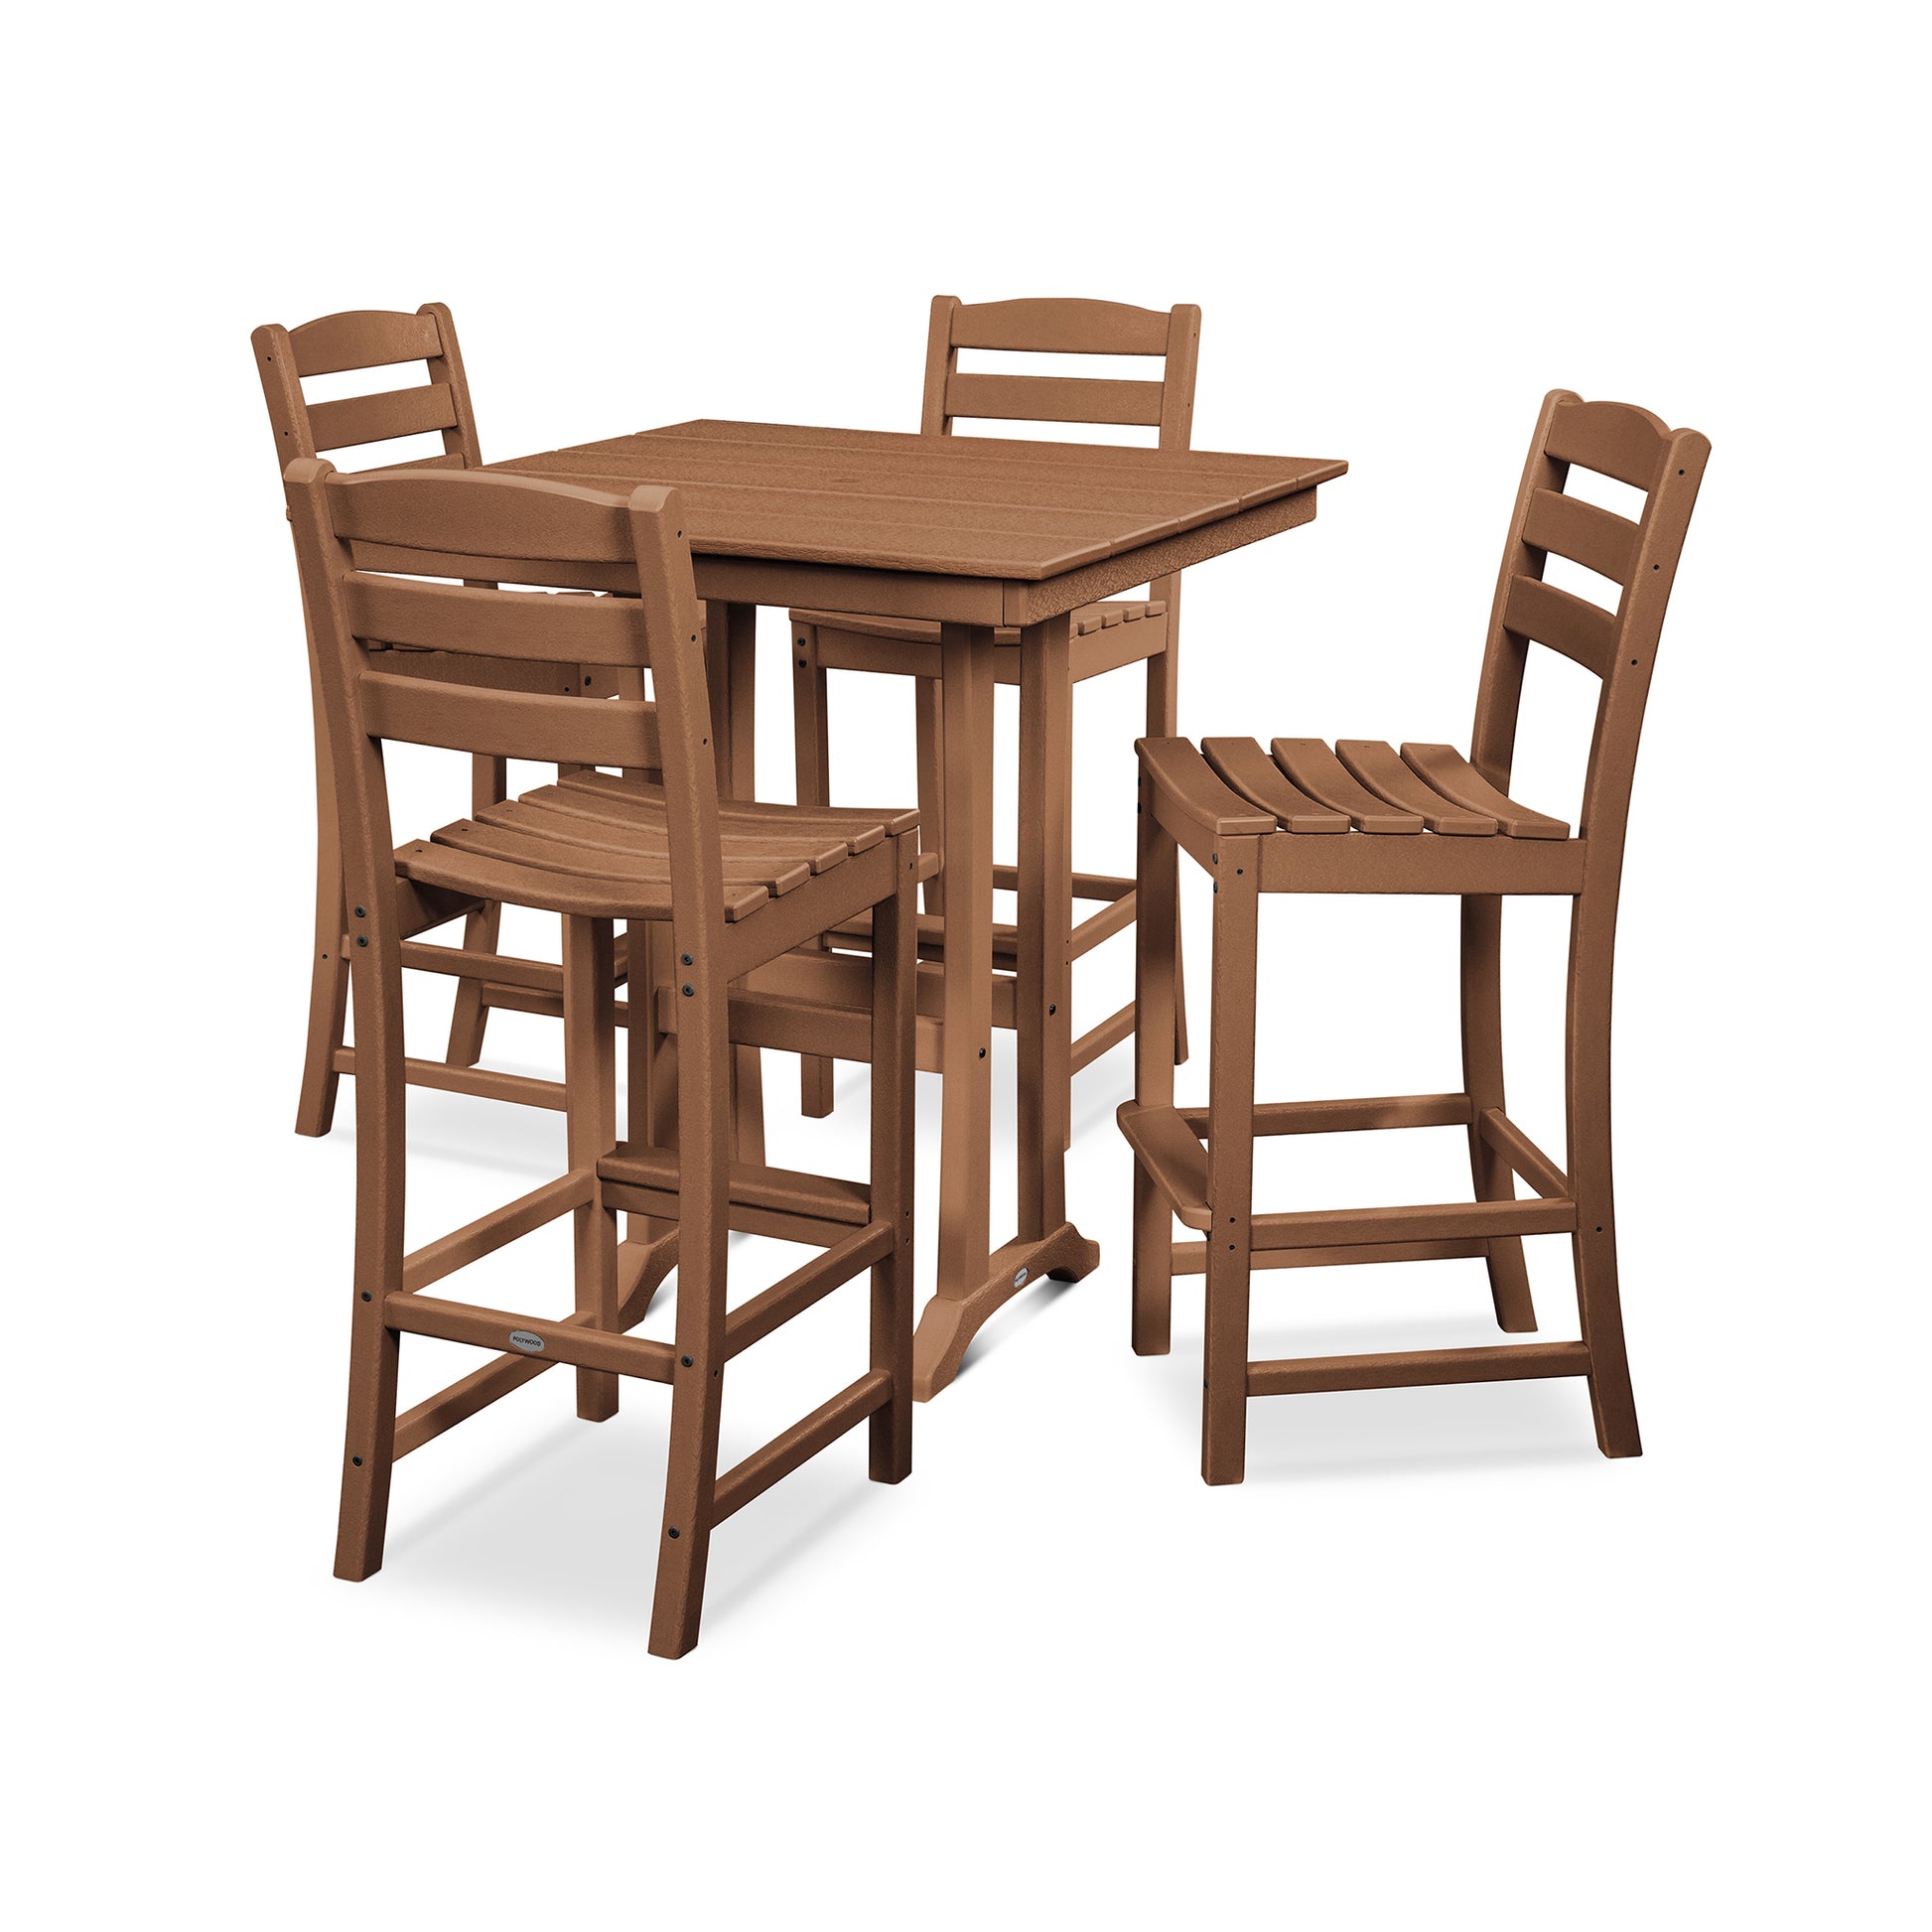 A square, high-top outdoor dining table with four matching bar chairs, all made of slatted POLYWOOD La Casa Cafe lumber, arranged on a plain white background.